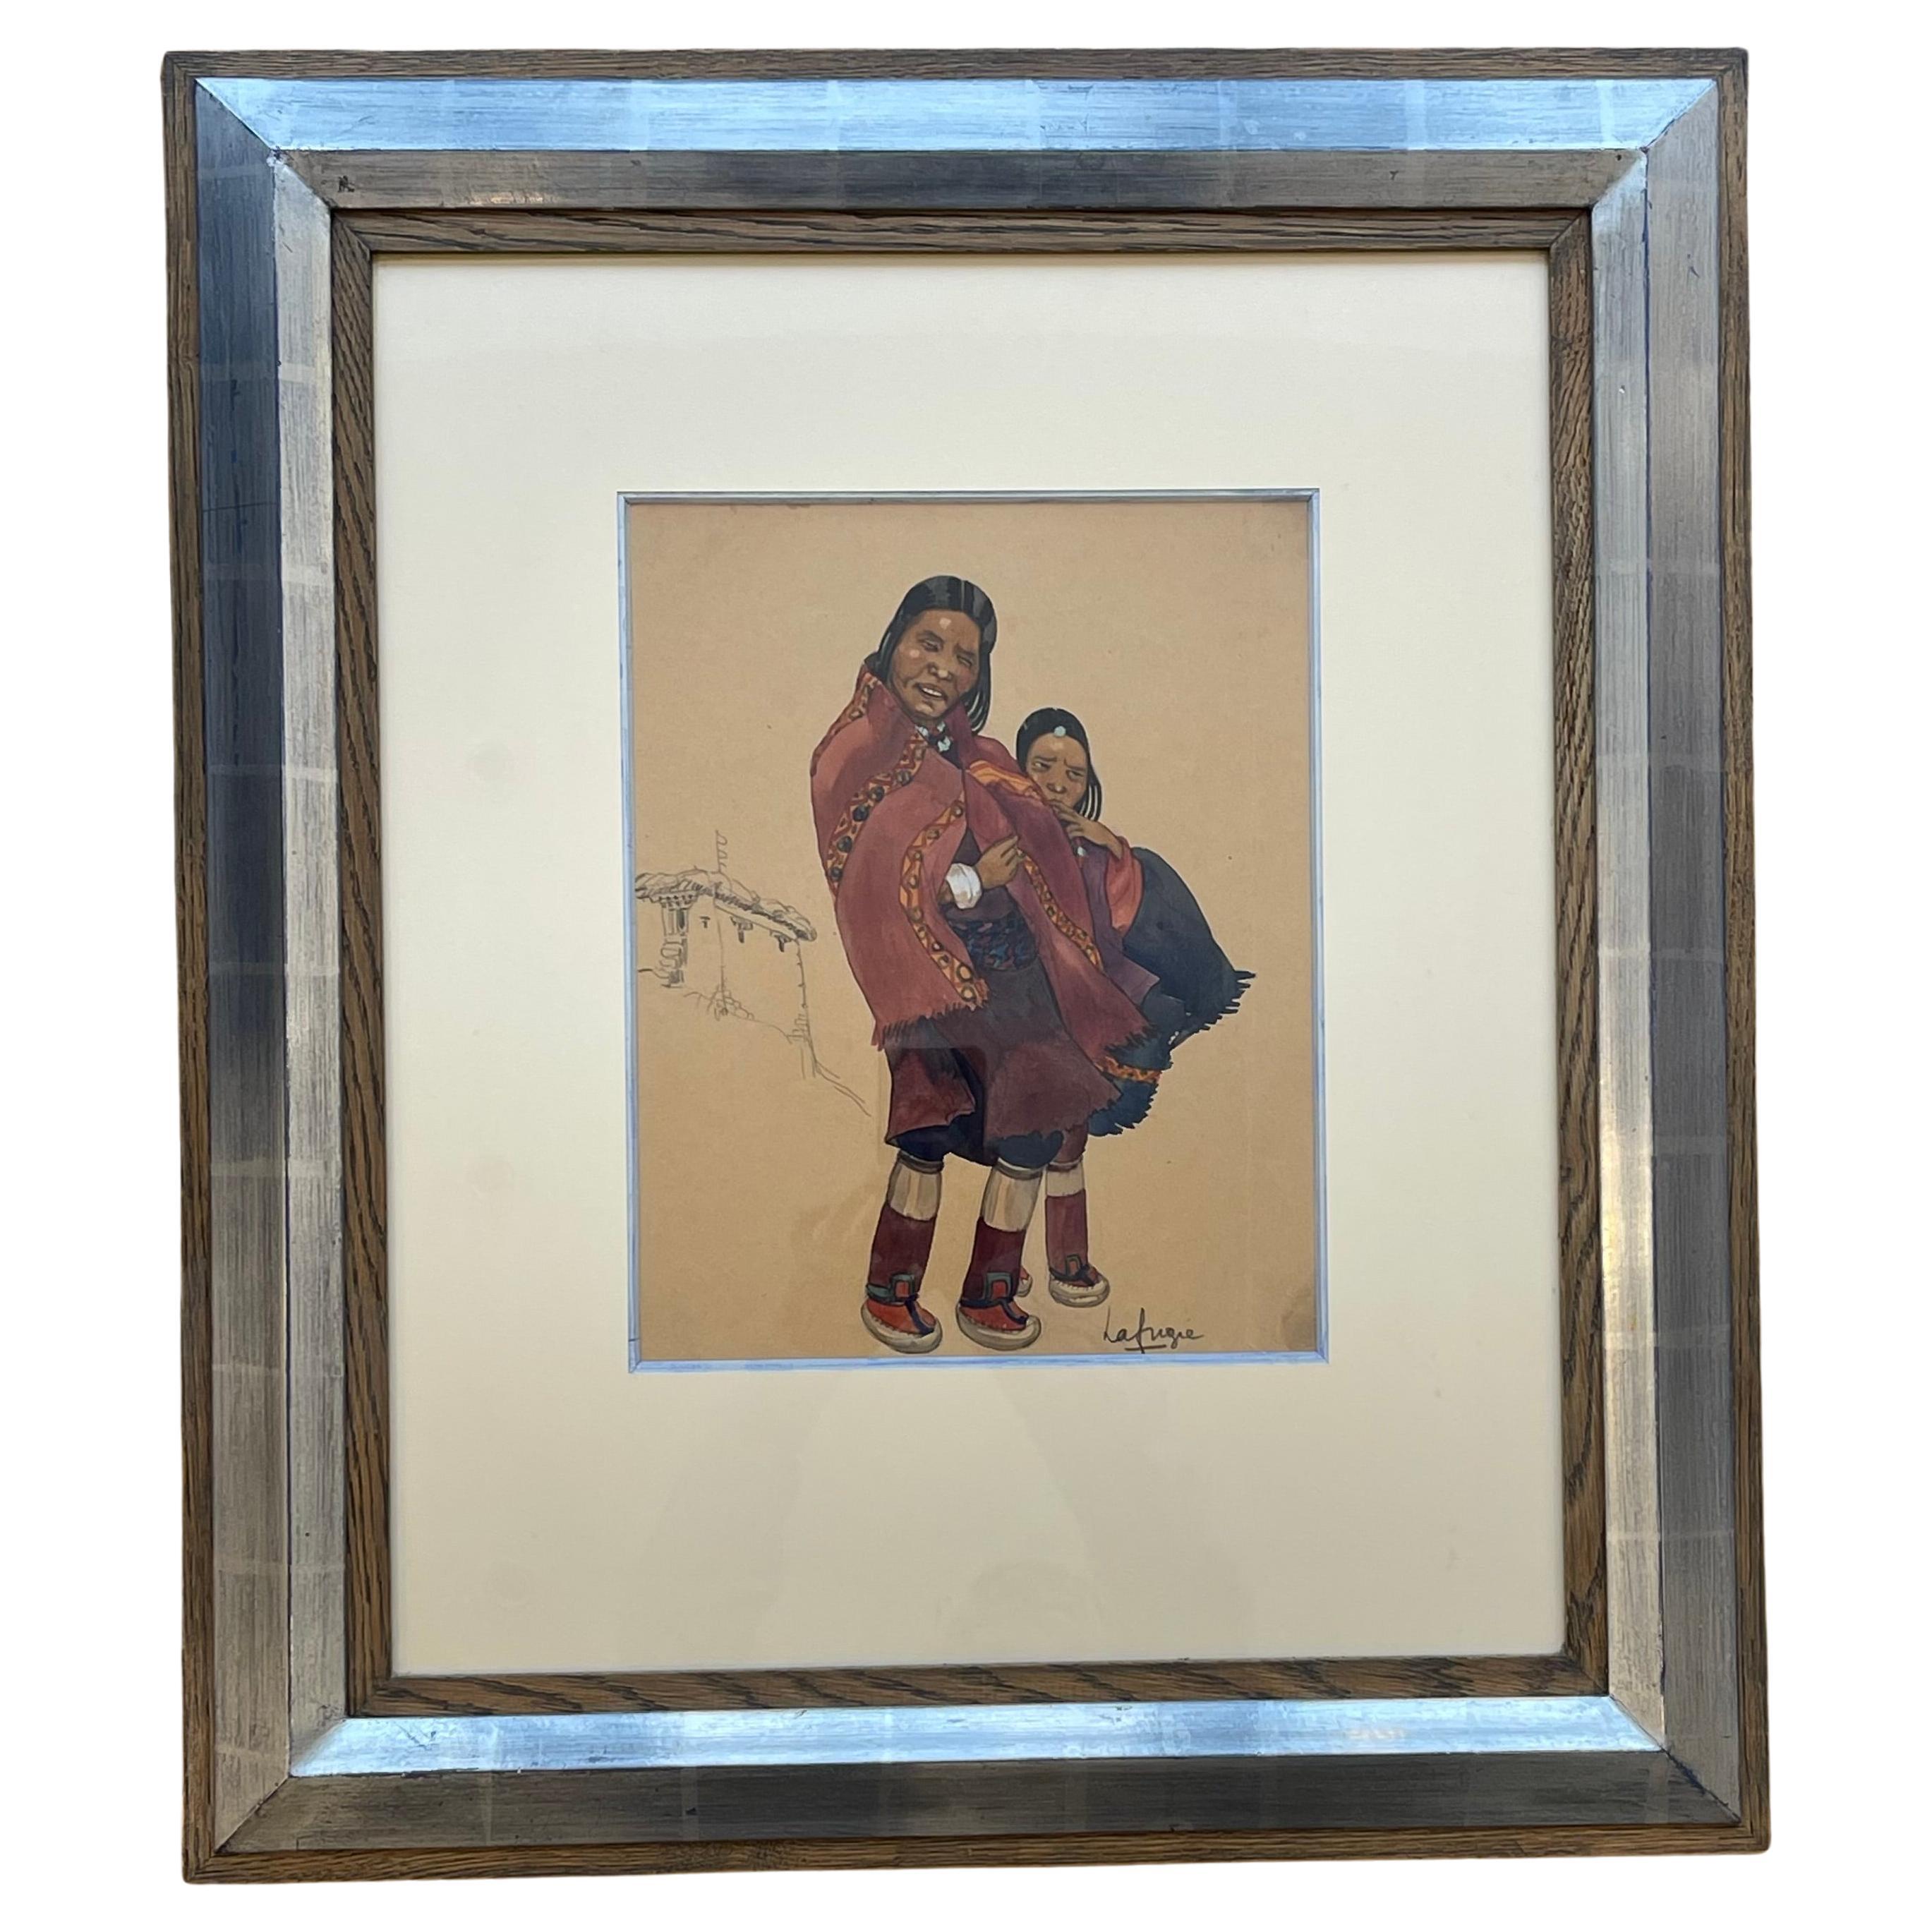  Gouache of a Tibetan woman and child, Léa LAFUGIE (1890-1972)